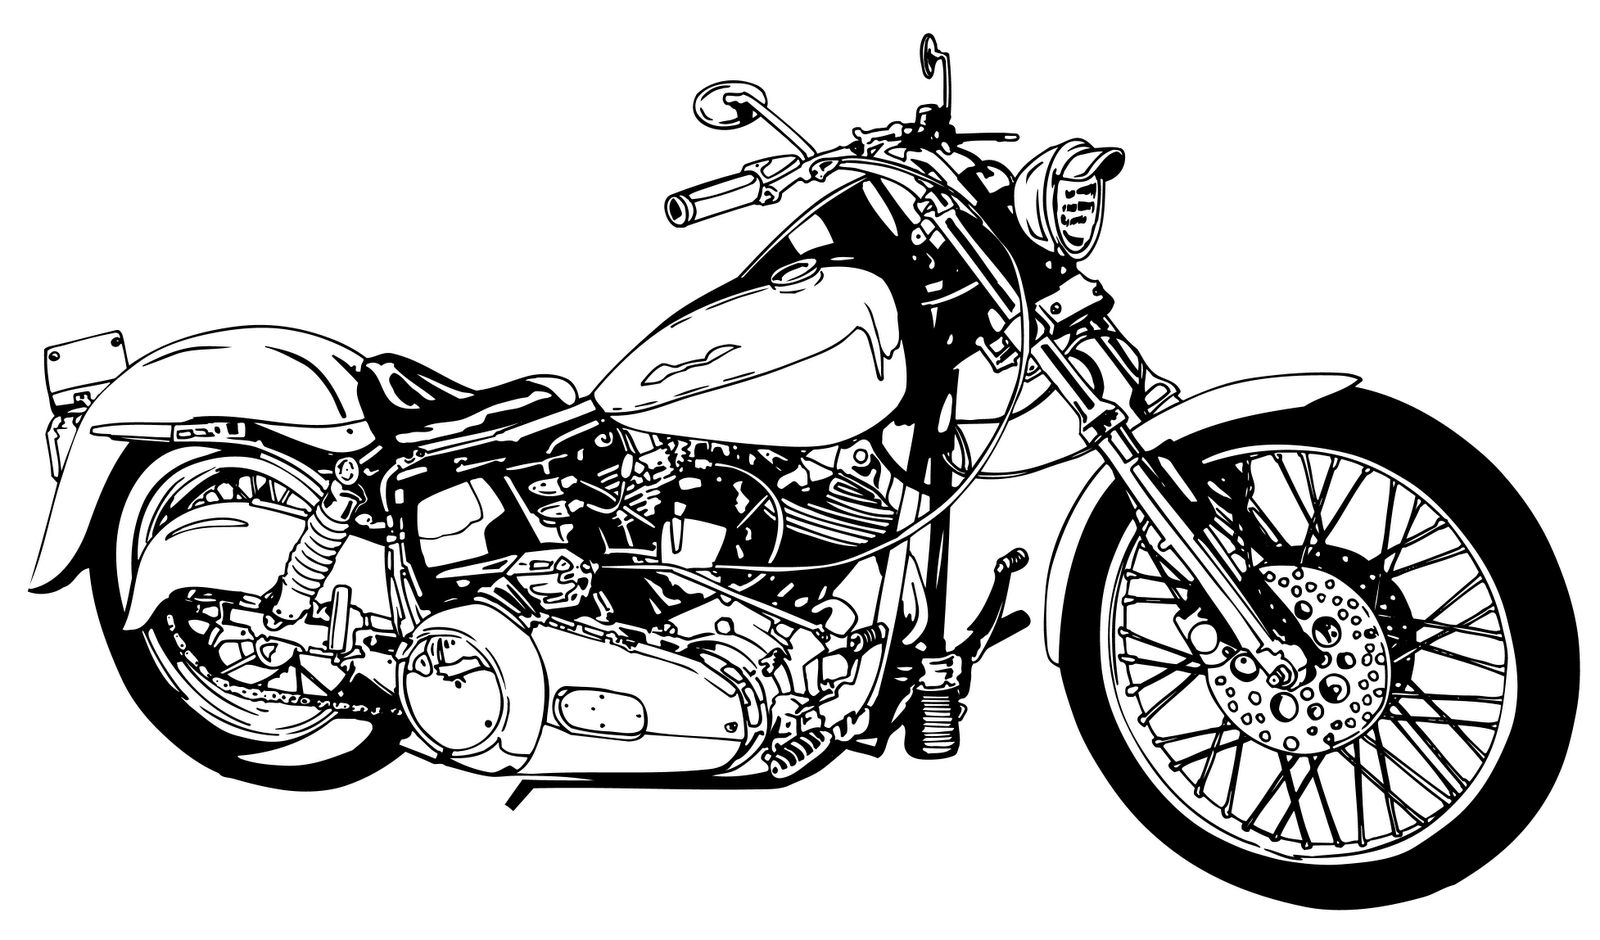 vintage motorcycle clipart - photo #21